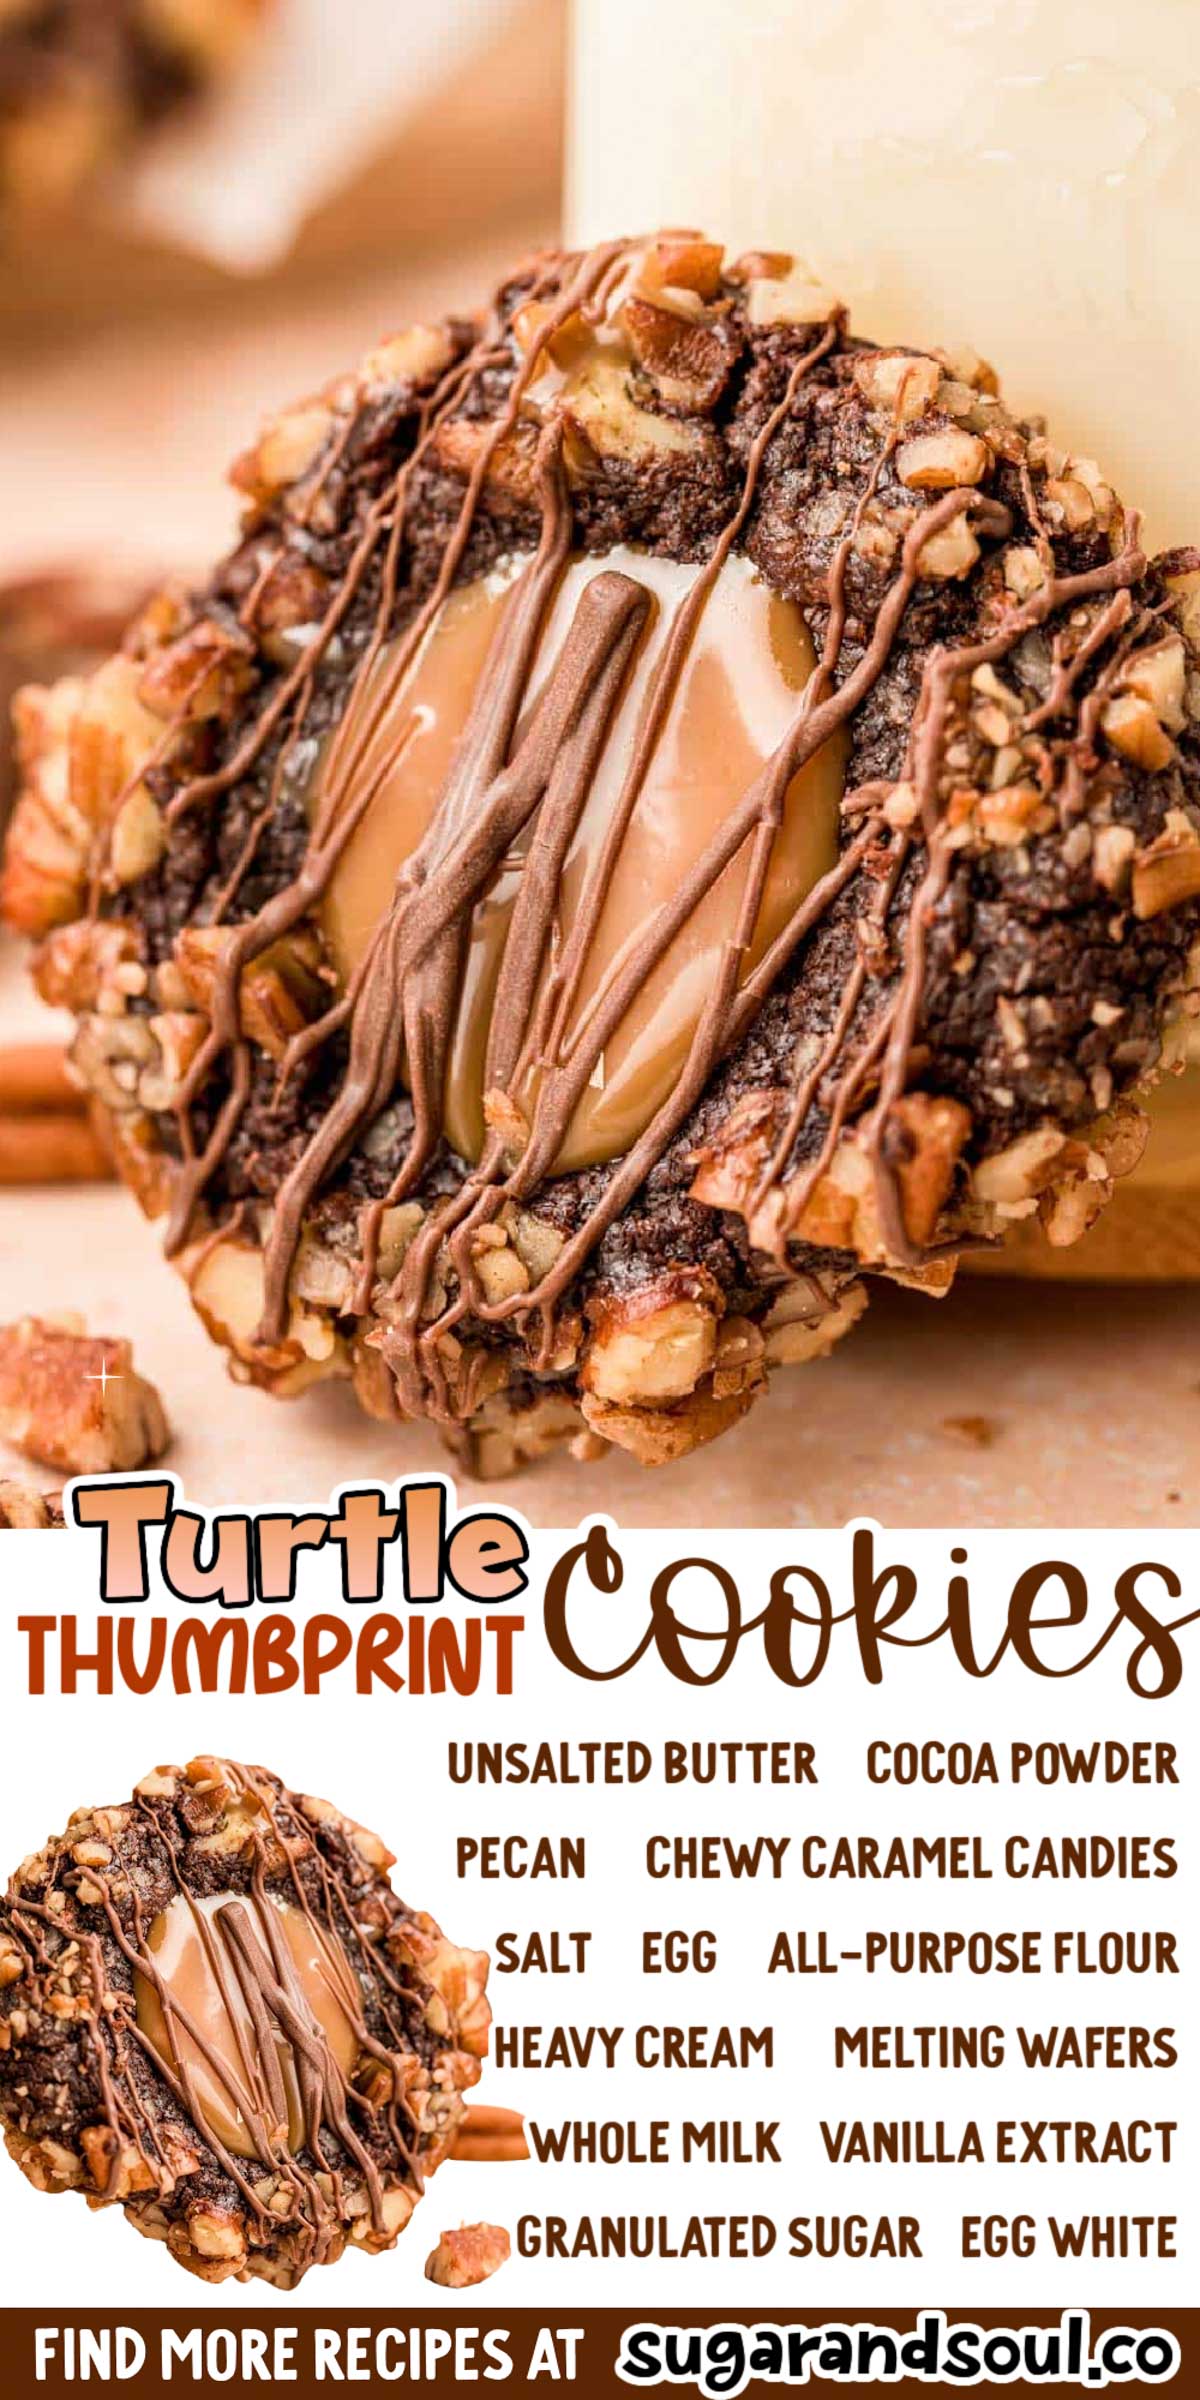 Turtle Thumbprint Cookies are soft chocolate cookies that are rolled in crunchy pecans, complete with a gooey caramel center and chocolate drizzle!  via @sugarandsoulco